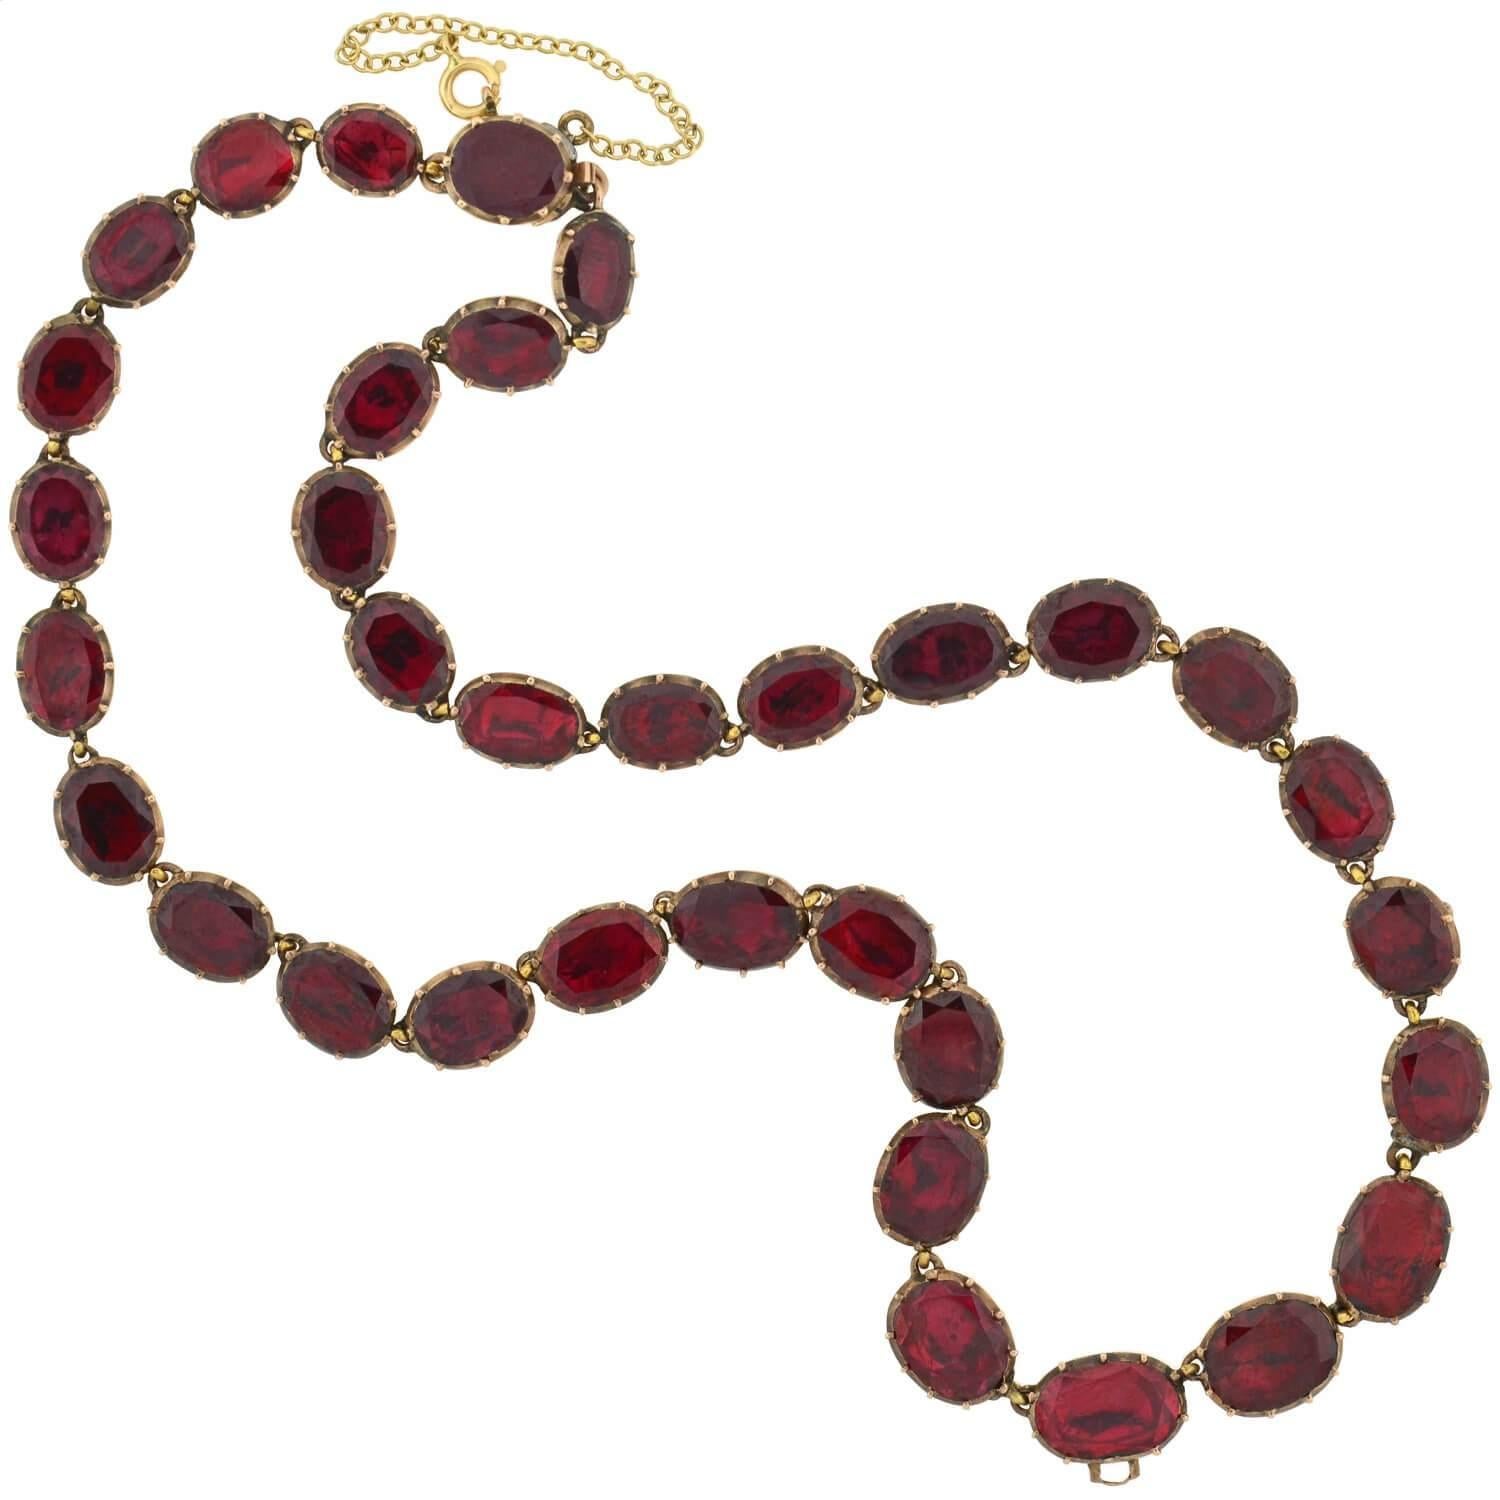 An absolutely stunning garnet necklace from the Georgian (ca1750) era! Crafted in 14kt rose gold, this beautiful piece is comprised of 34 garnet links that connect together to form a gorgeous collar necklace. The oval-shaped stones graduate slightly